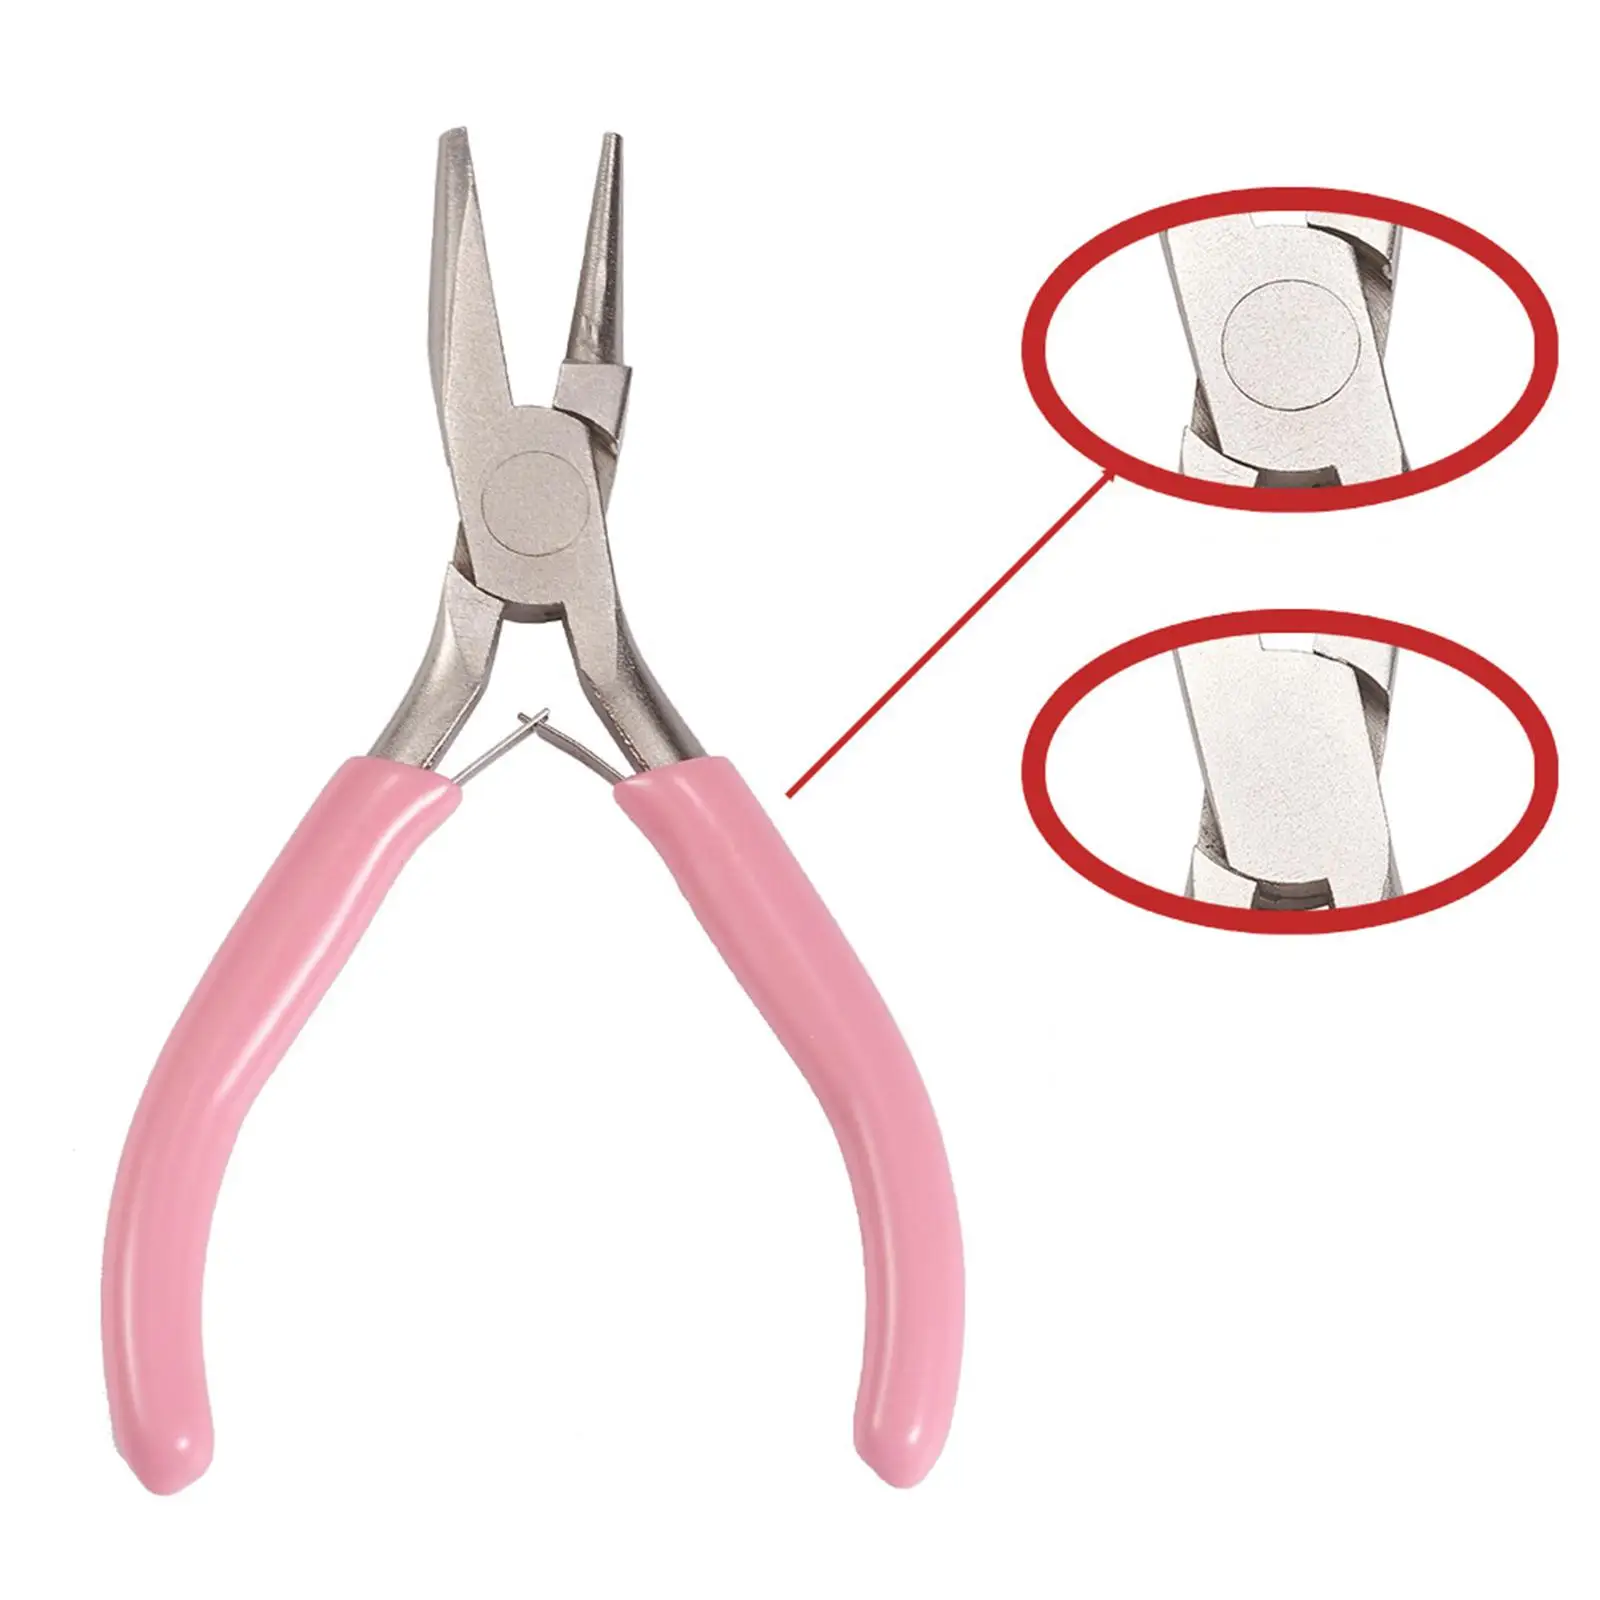 Round Concave Pliers Sturdy Wire Bending with None Slip Handle Professional Wire Looping Pliers for DIY Crafts Looping Loops